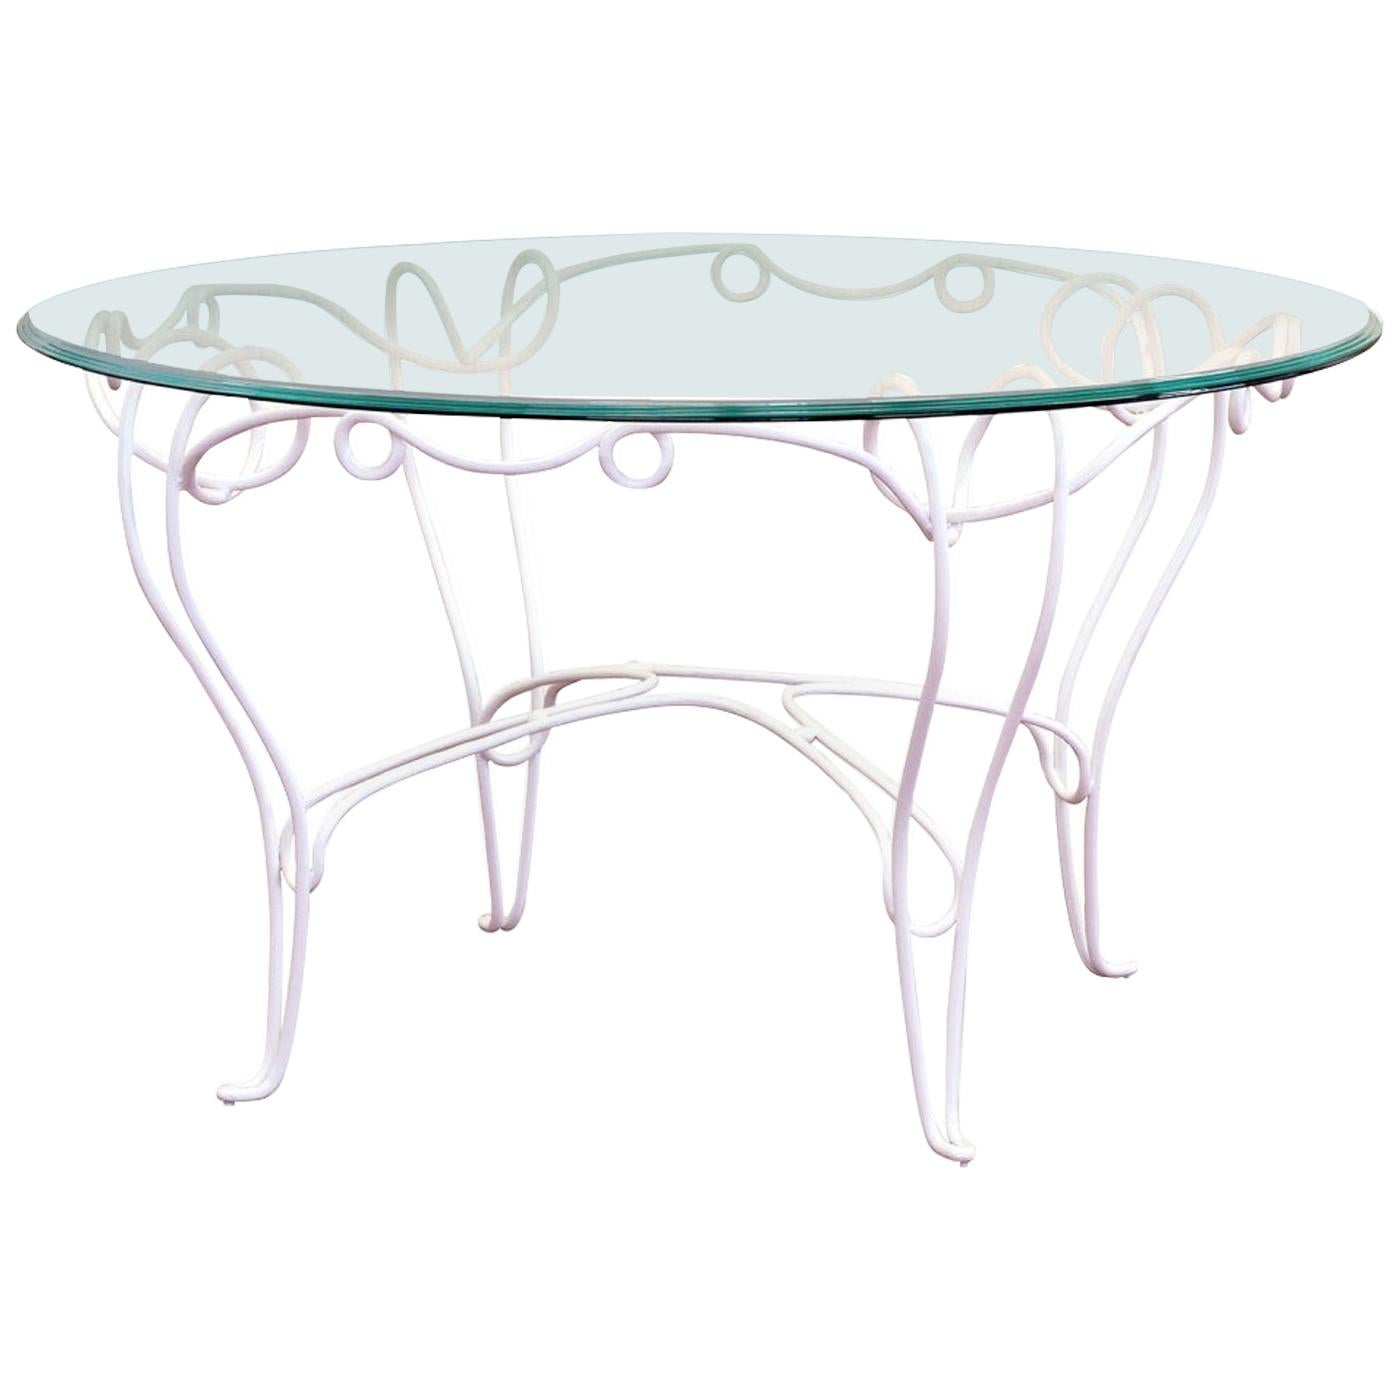 Table Philo, for Outdoor, Made in Italy